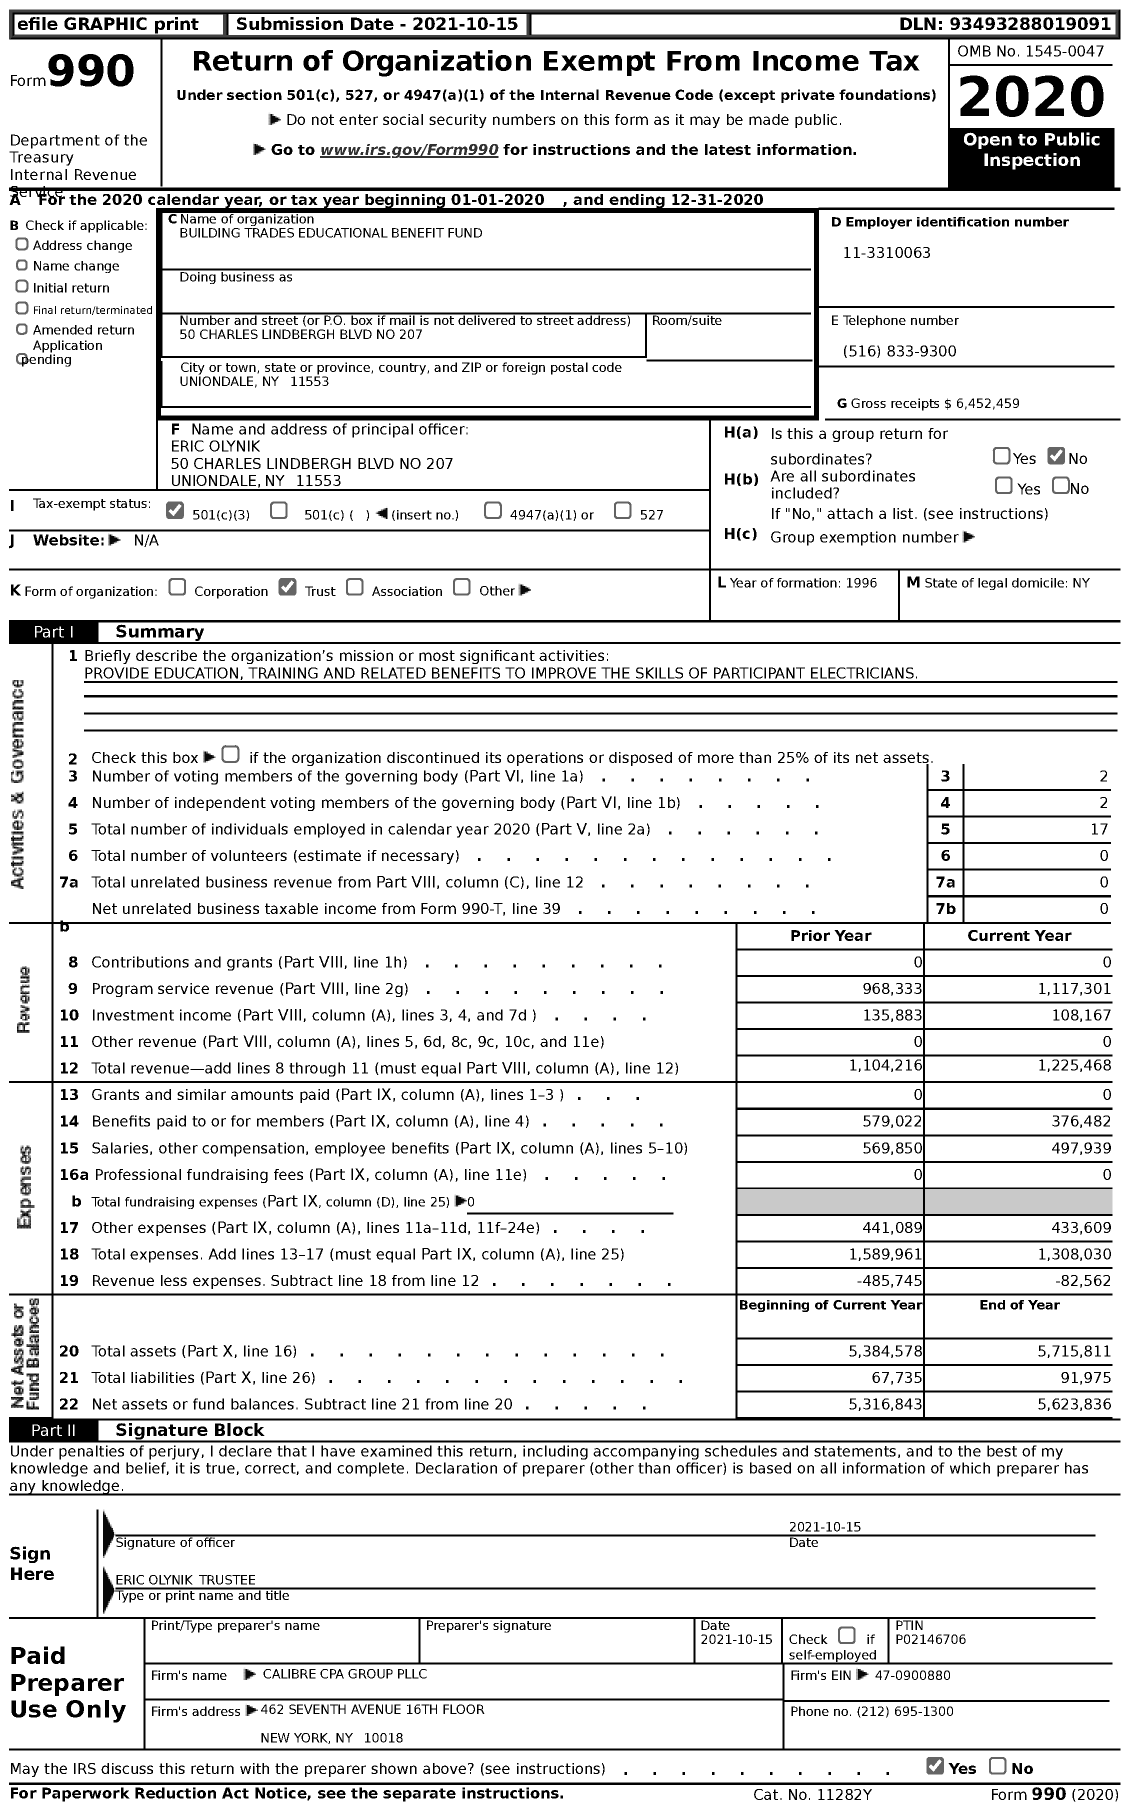 Image of first page of 2020 Form 990 for Building Trades Educational Benefit Fund